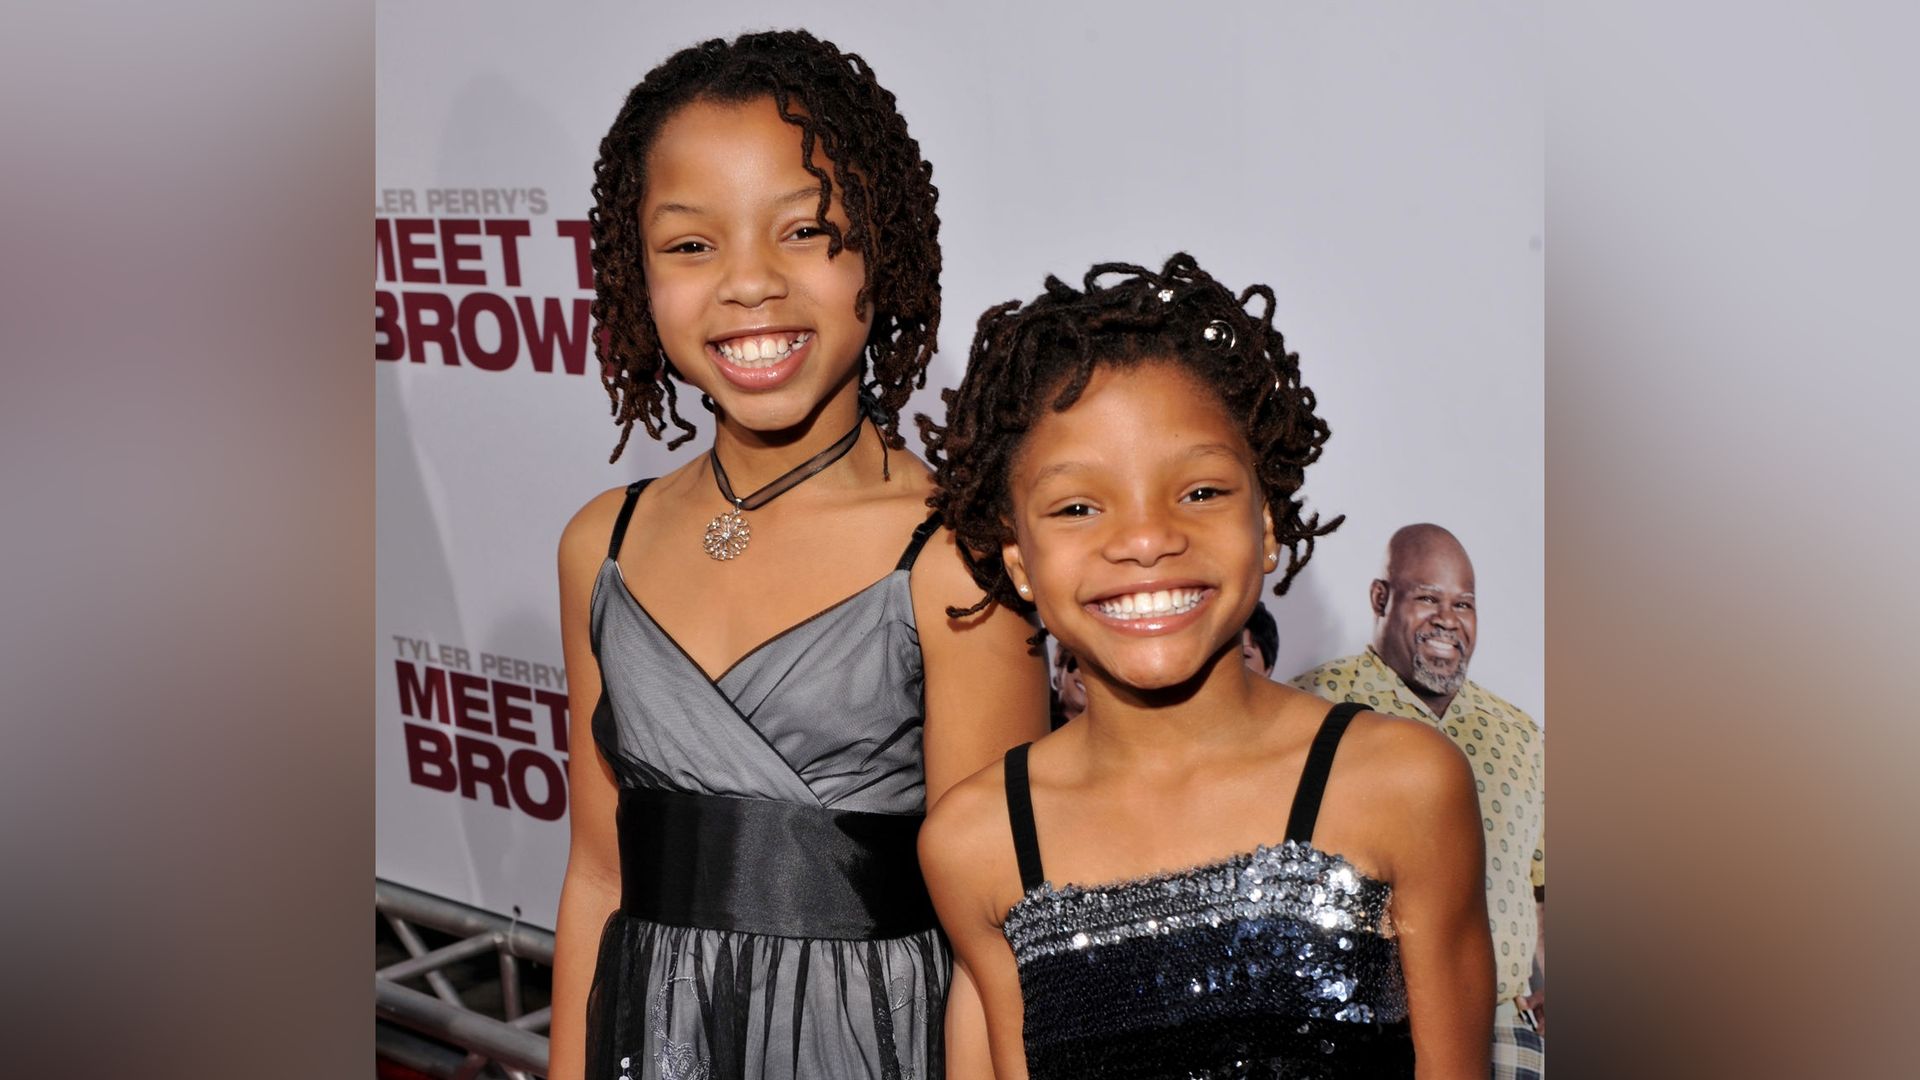 Halle Bailey with her sister as a child